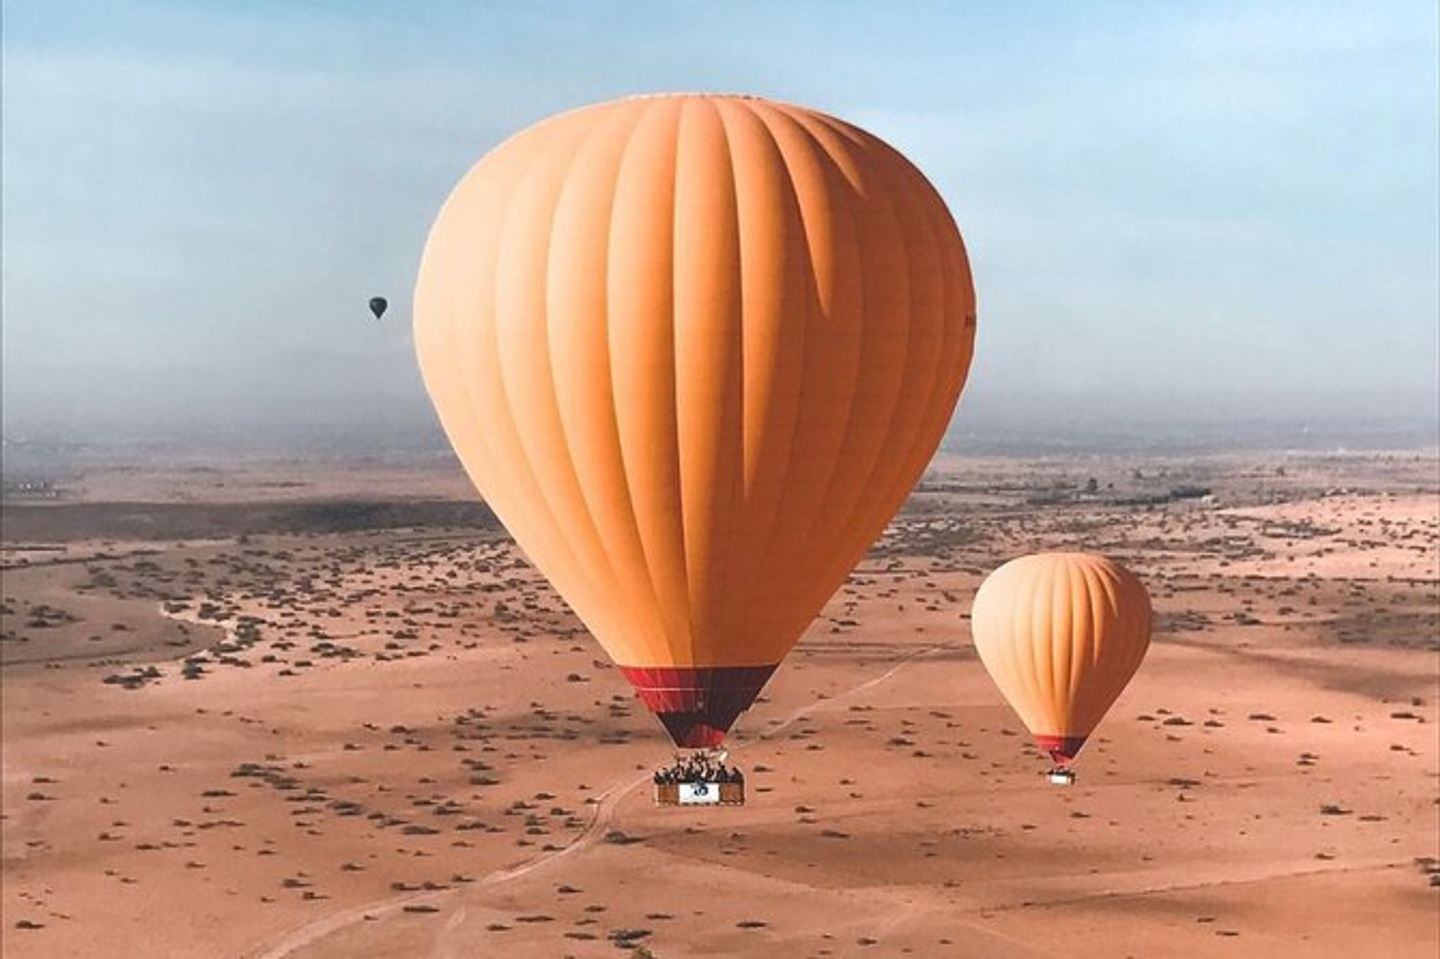 Hot Air Ballooning Experience Over Marrakech with hotel transfers